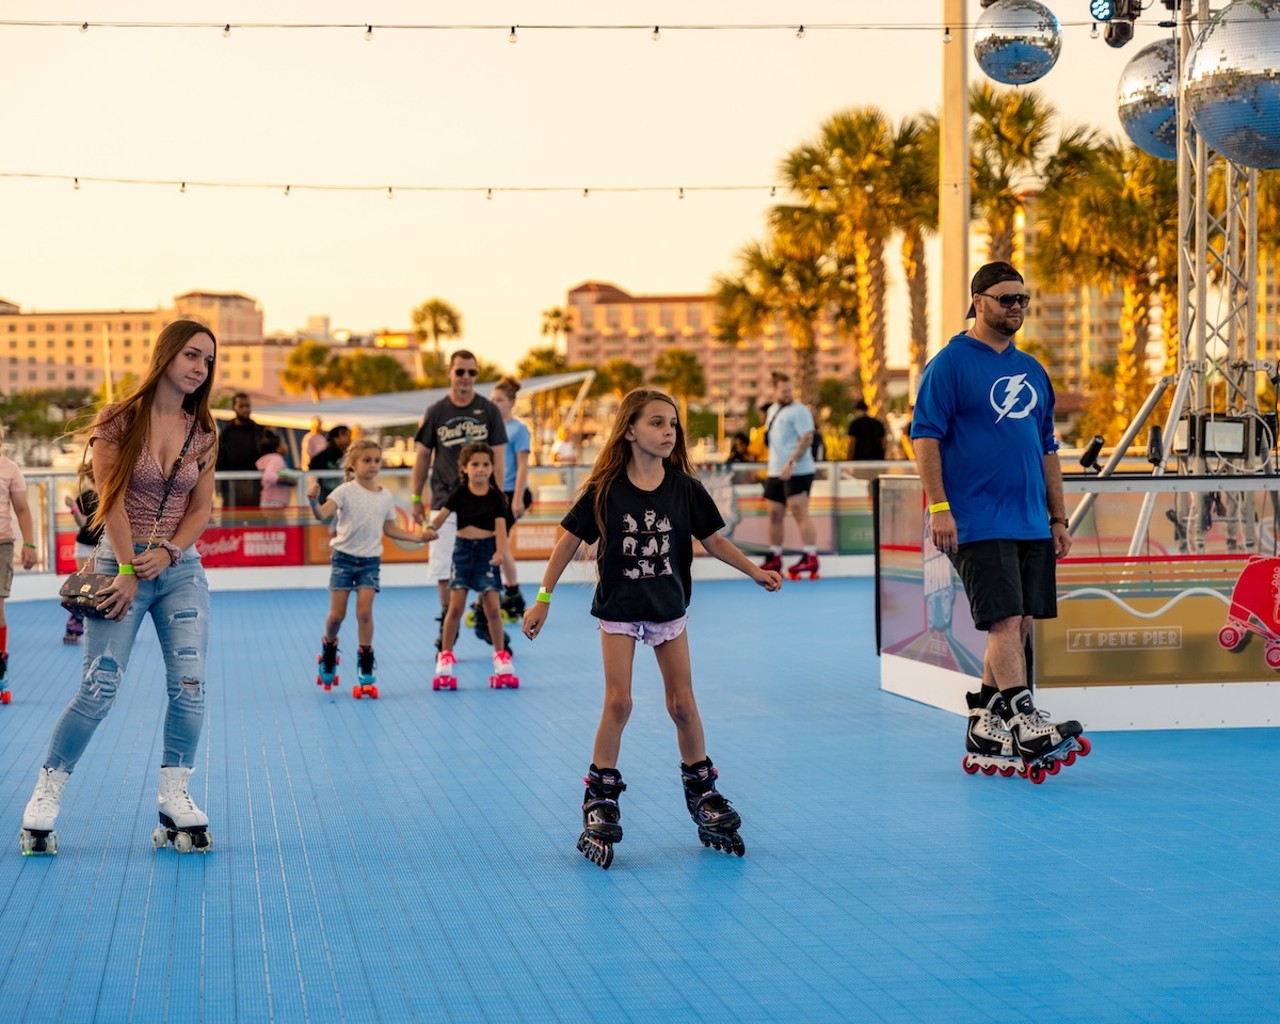 The roller skating rink at the St. Pete Pier reopens in March